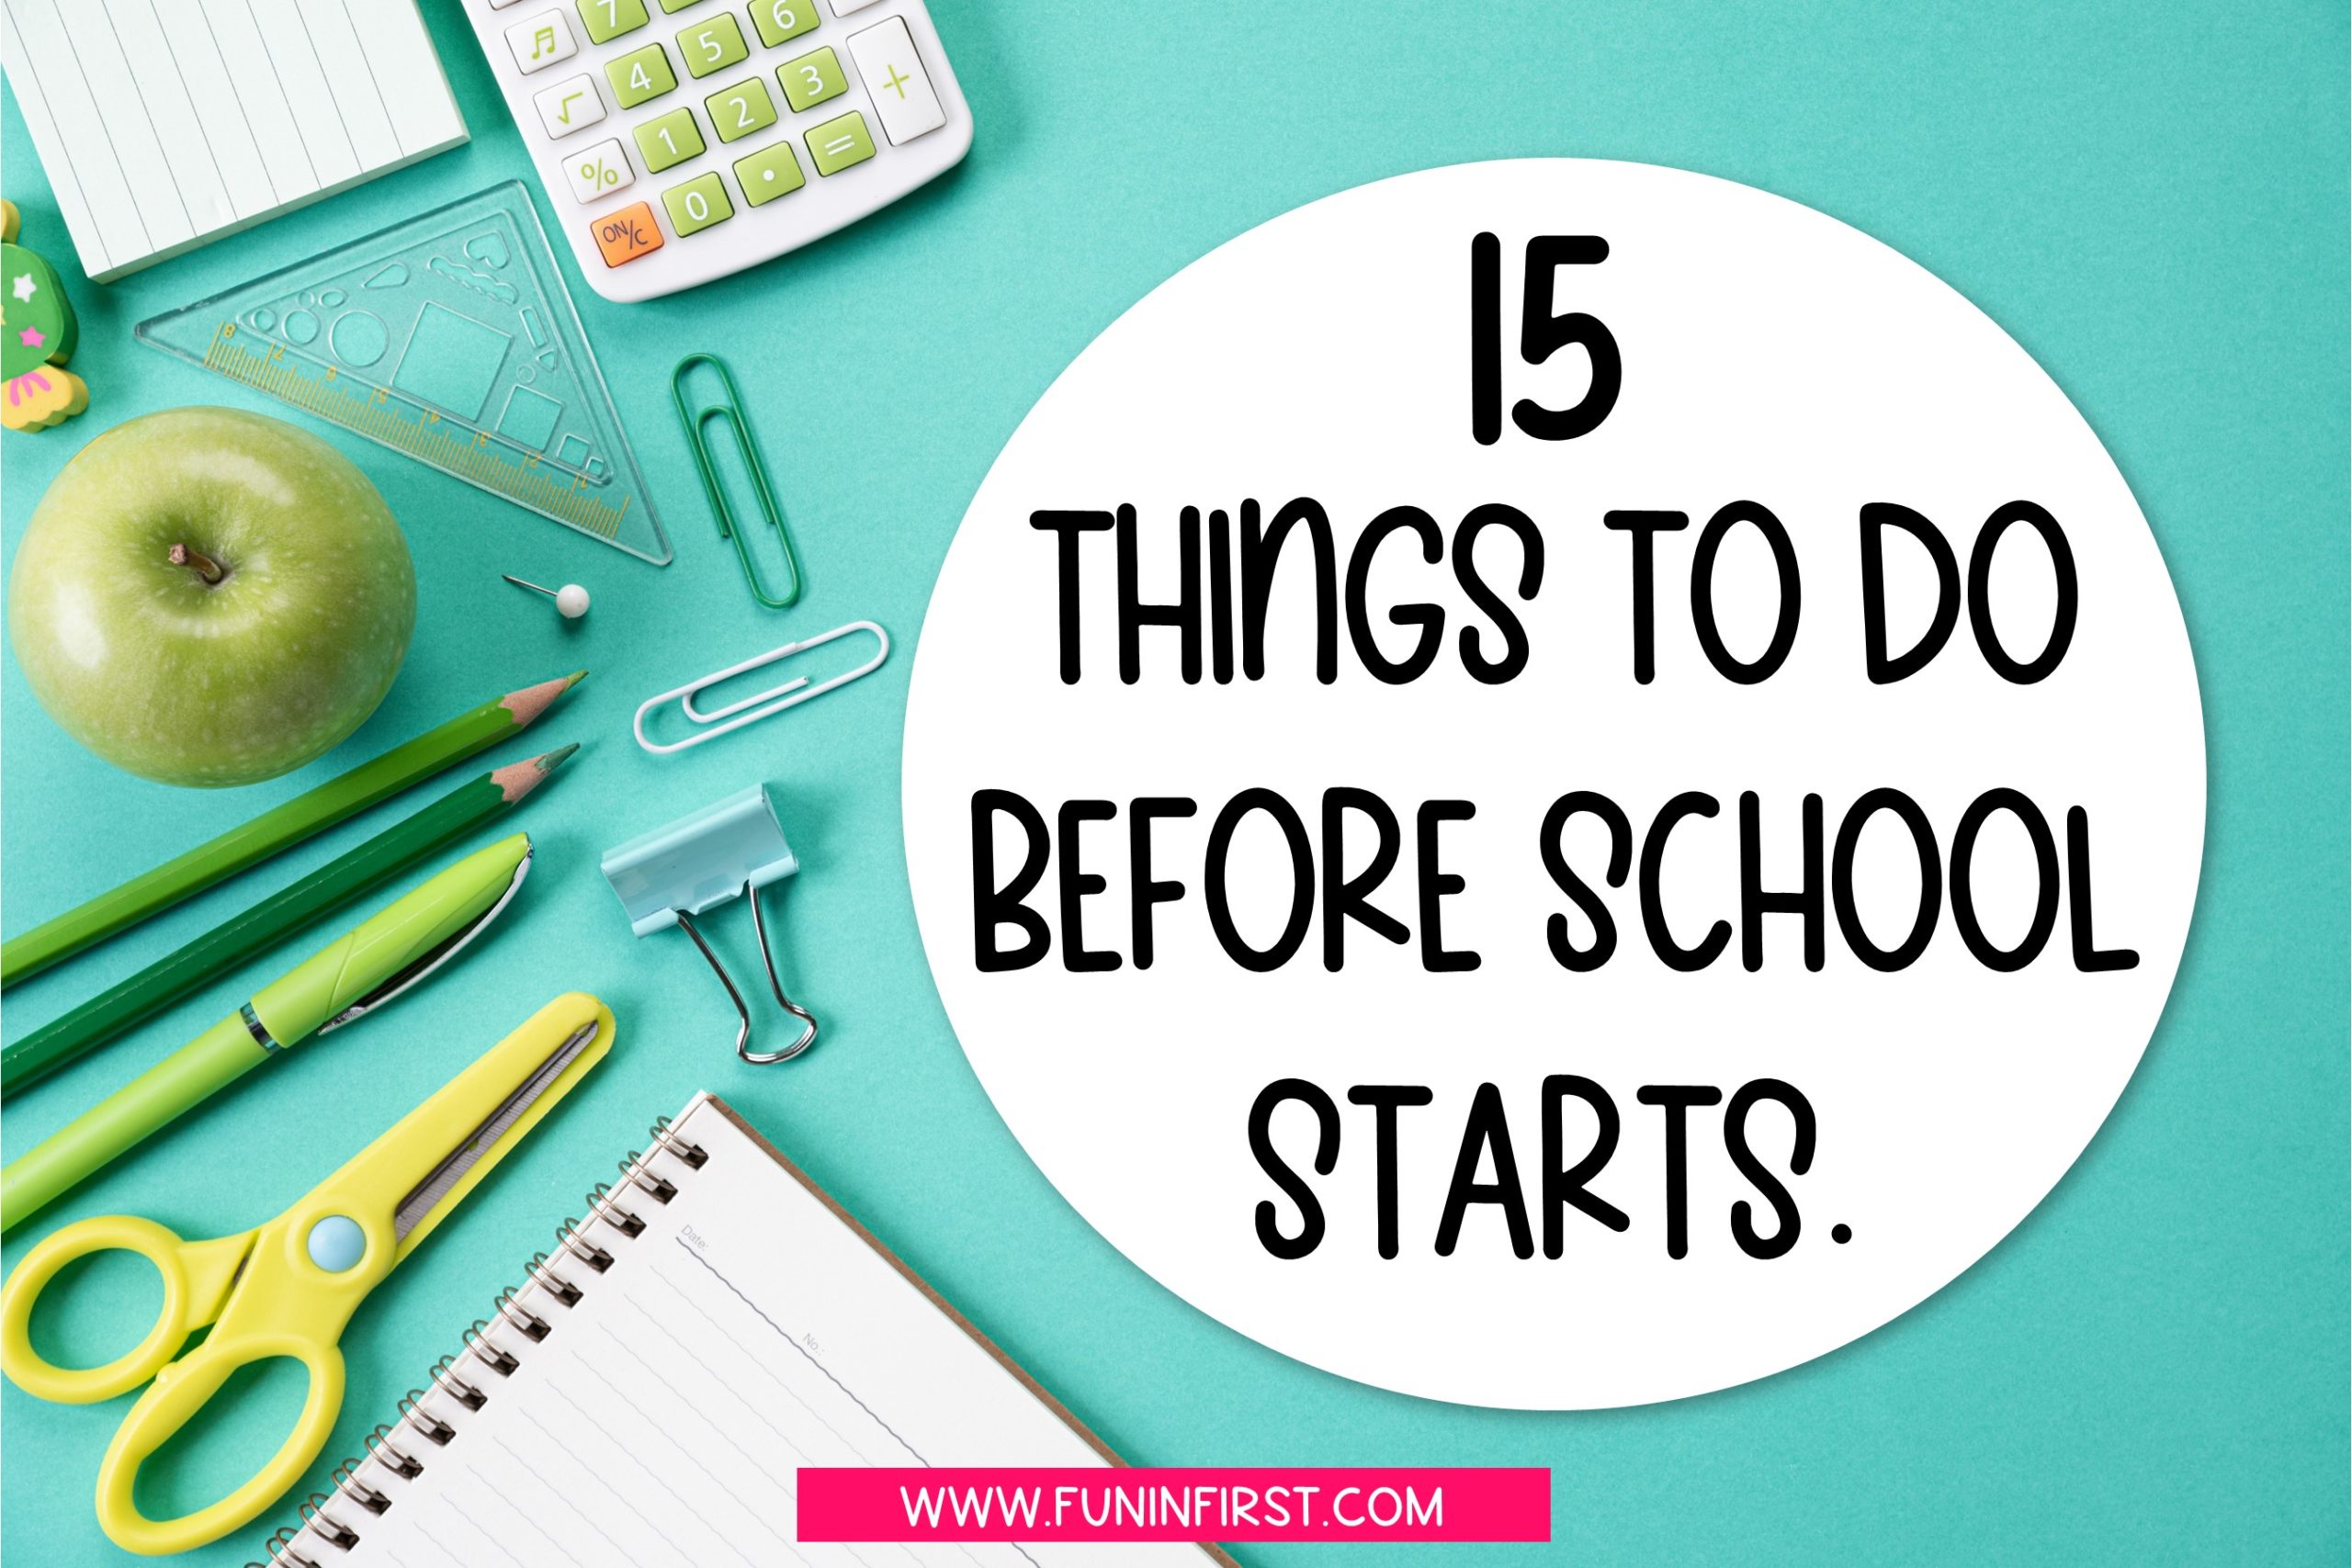 15 Things to Do Before School Starts